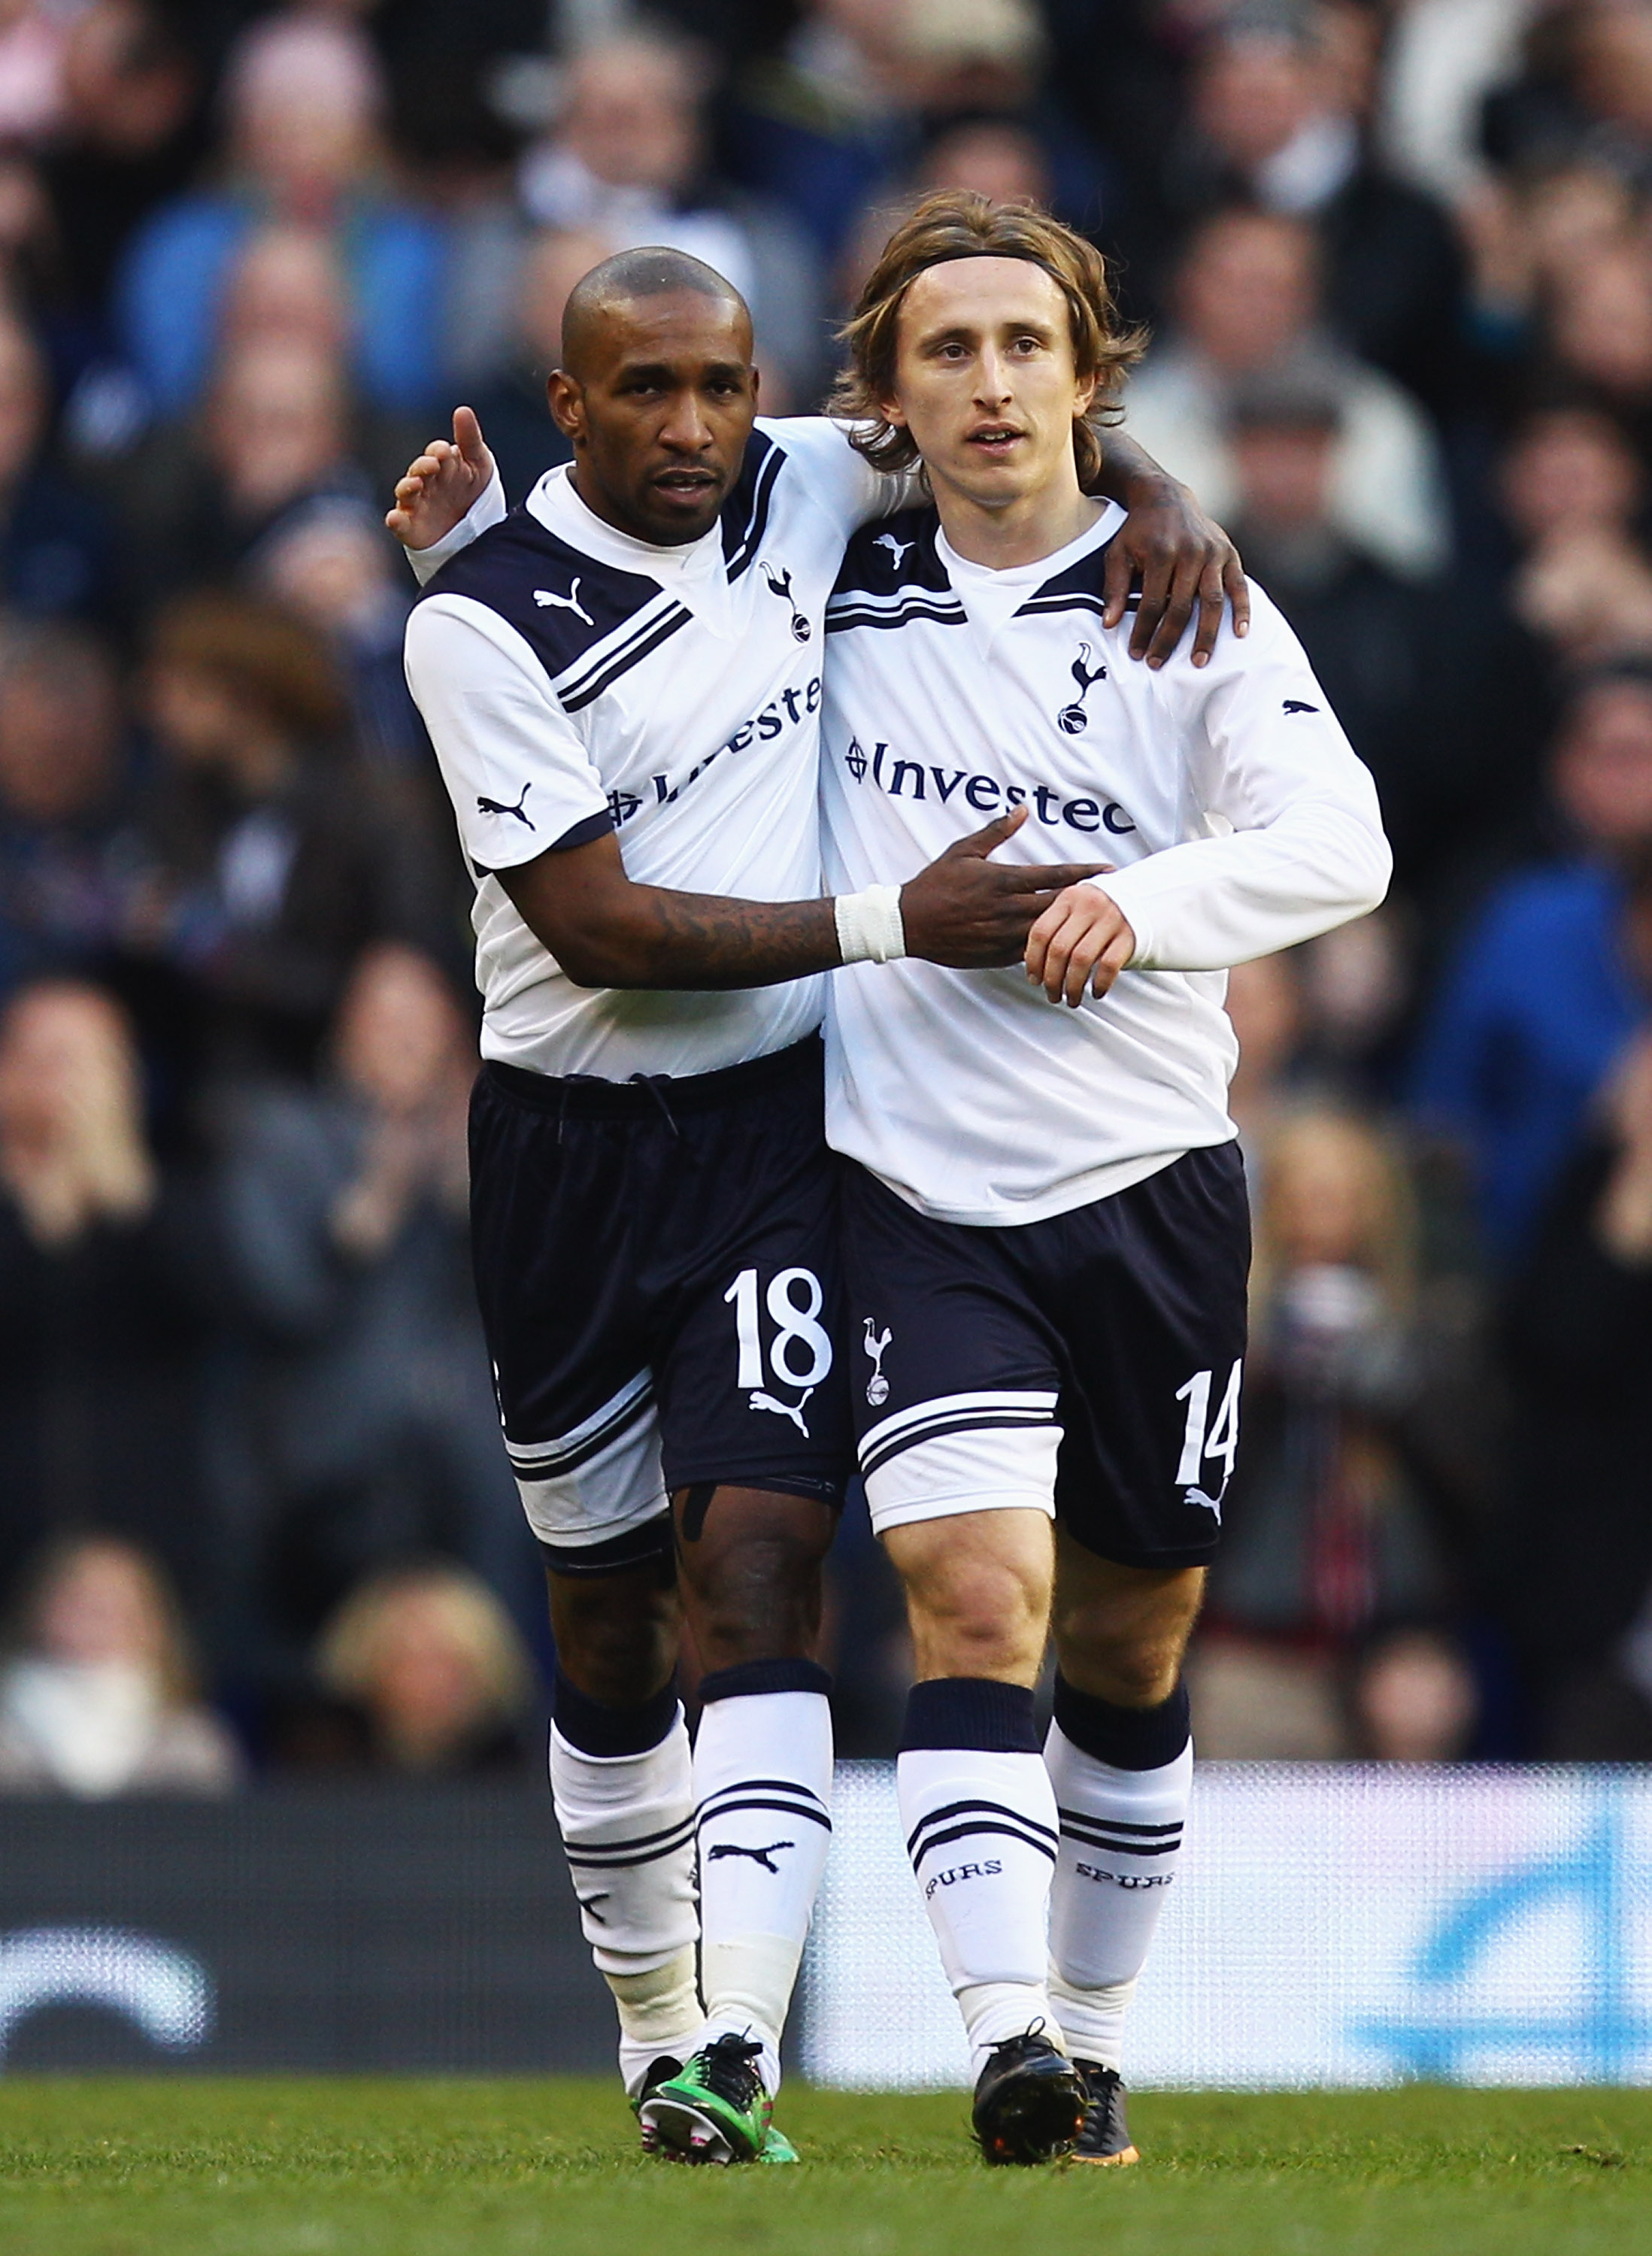 LONDON, ENGLAND - JANUARY 09:  Jermain Defoe (L) of Tottenham Hotspur celebrates his second goal with Luka Modric during the FA Cup sponsored by E.ON 3rd Round match between Tottenham Hotspur and Charlton Athletic at White Hart Lane on January 9, 2011 in